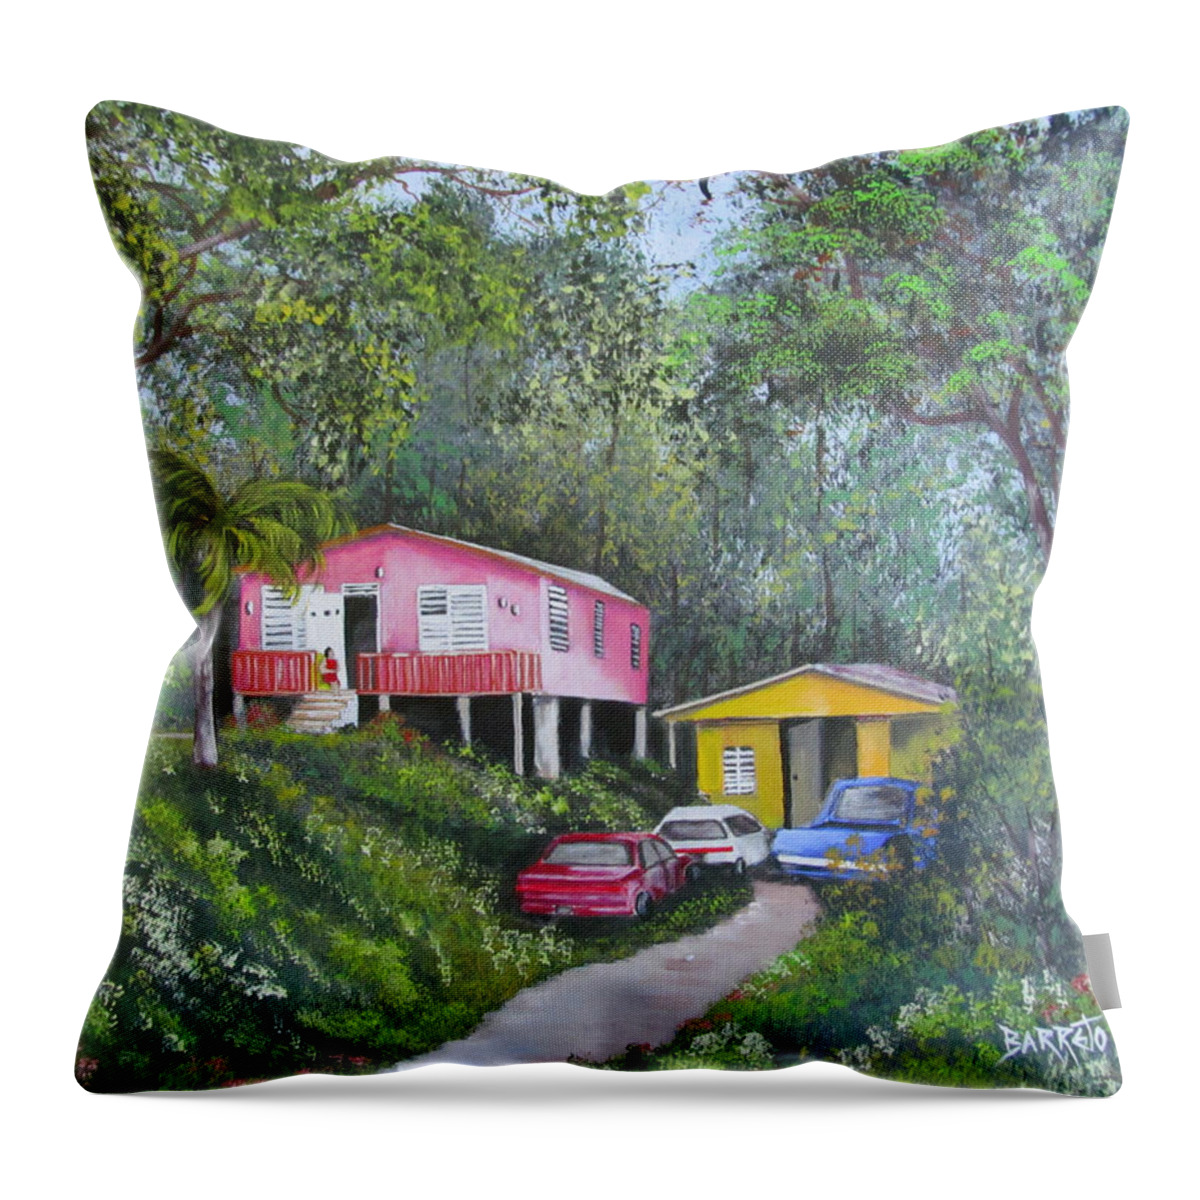  Throw Pillow featuring the painting Time To Reflect by Gloria E Barreto-Rodriguez